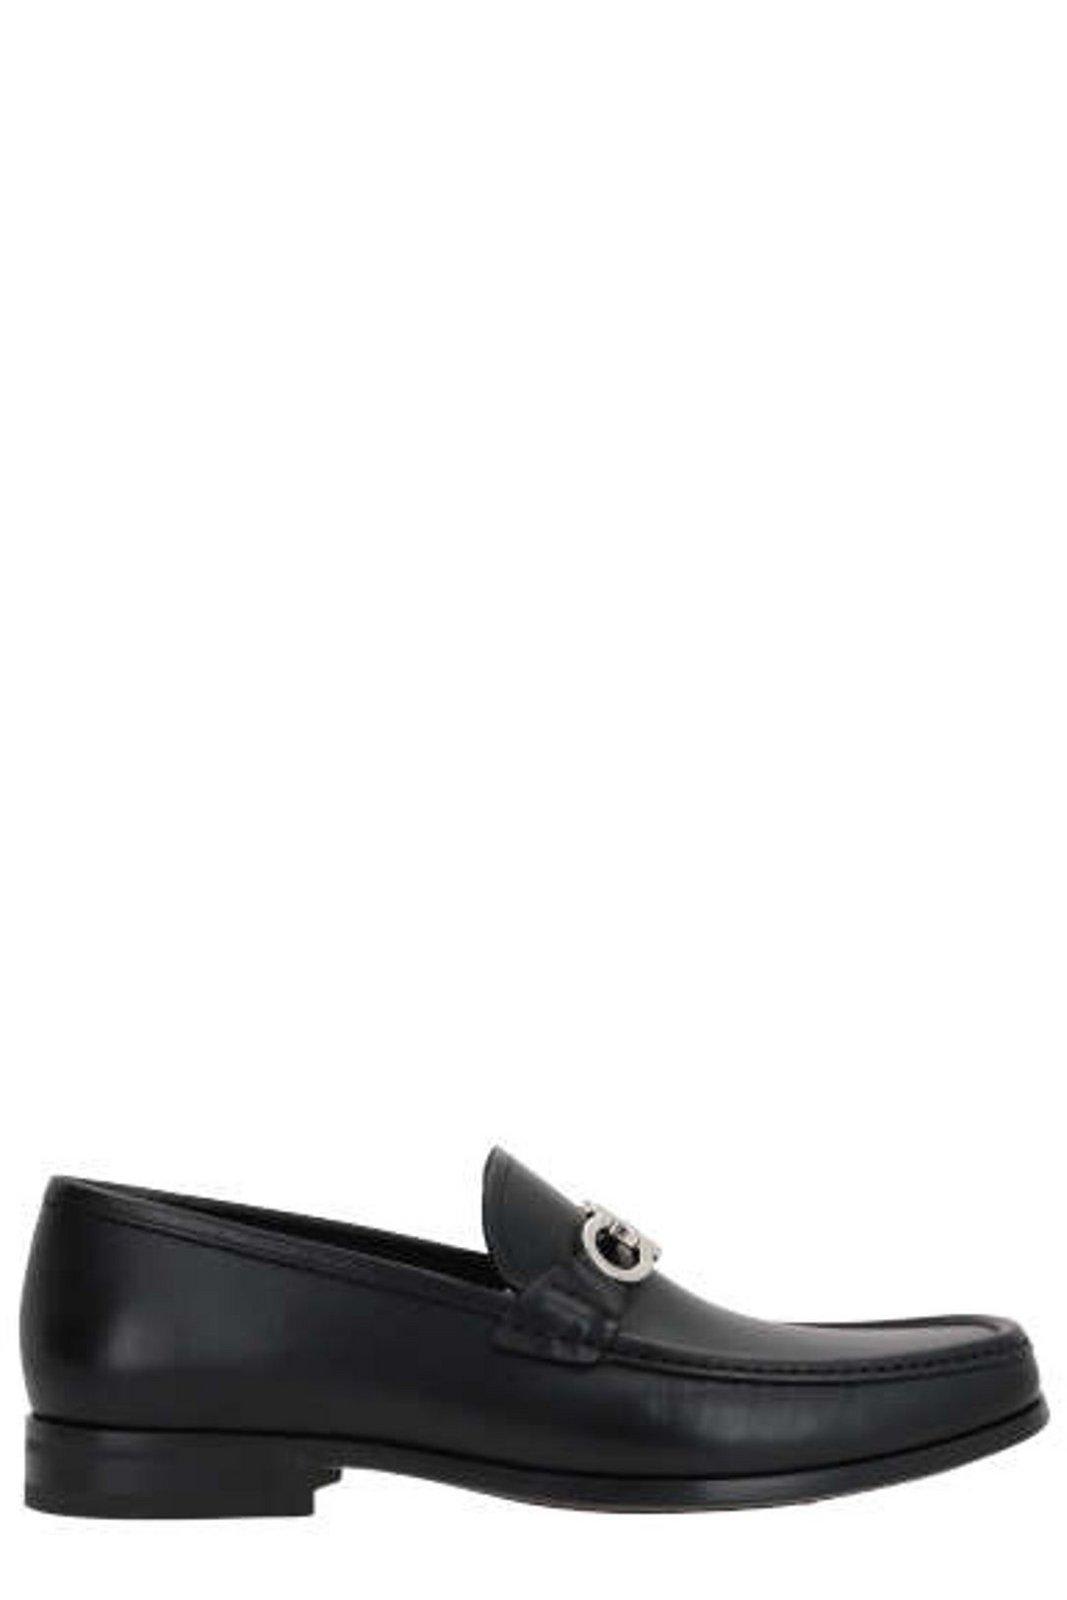 Chris Round-toe Loafers